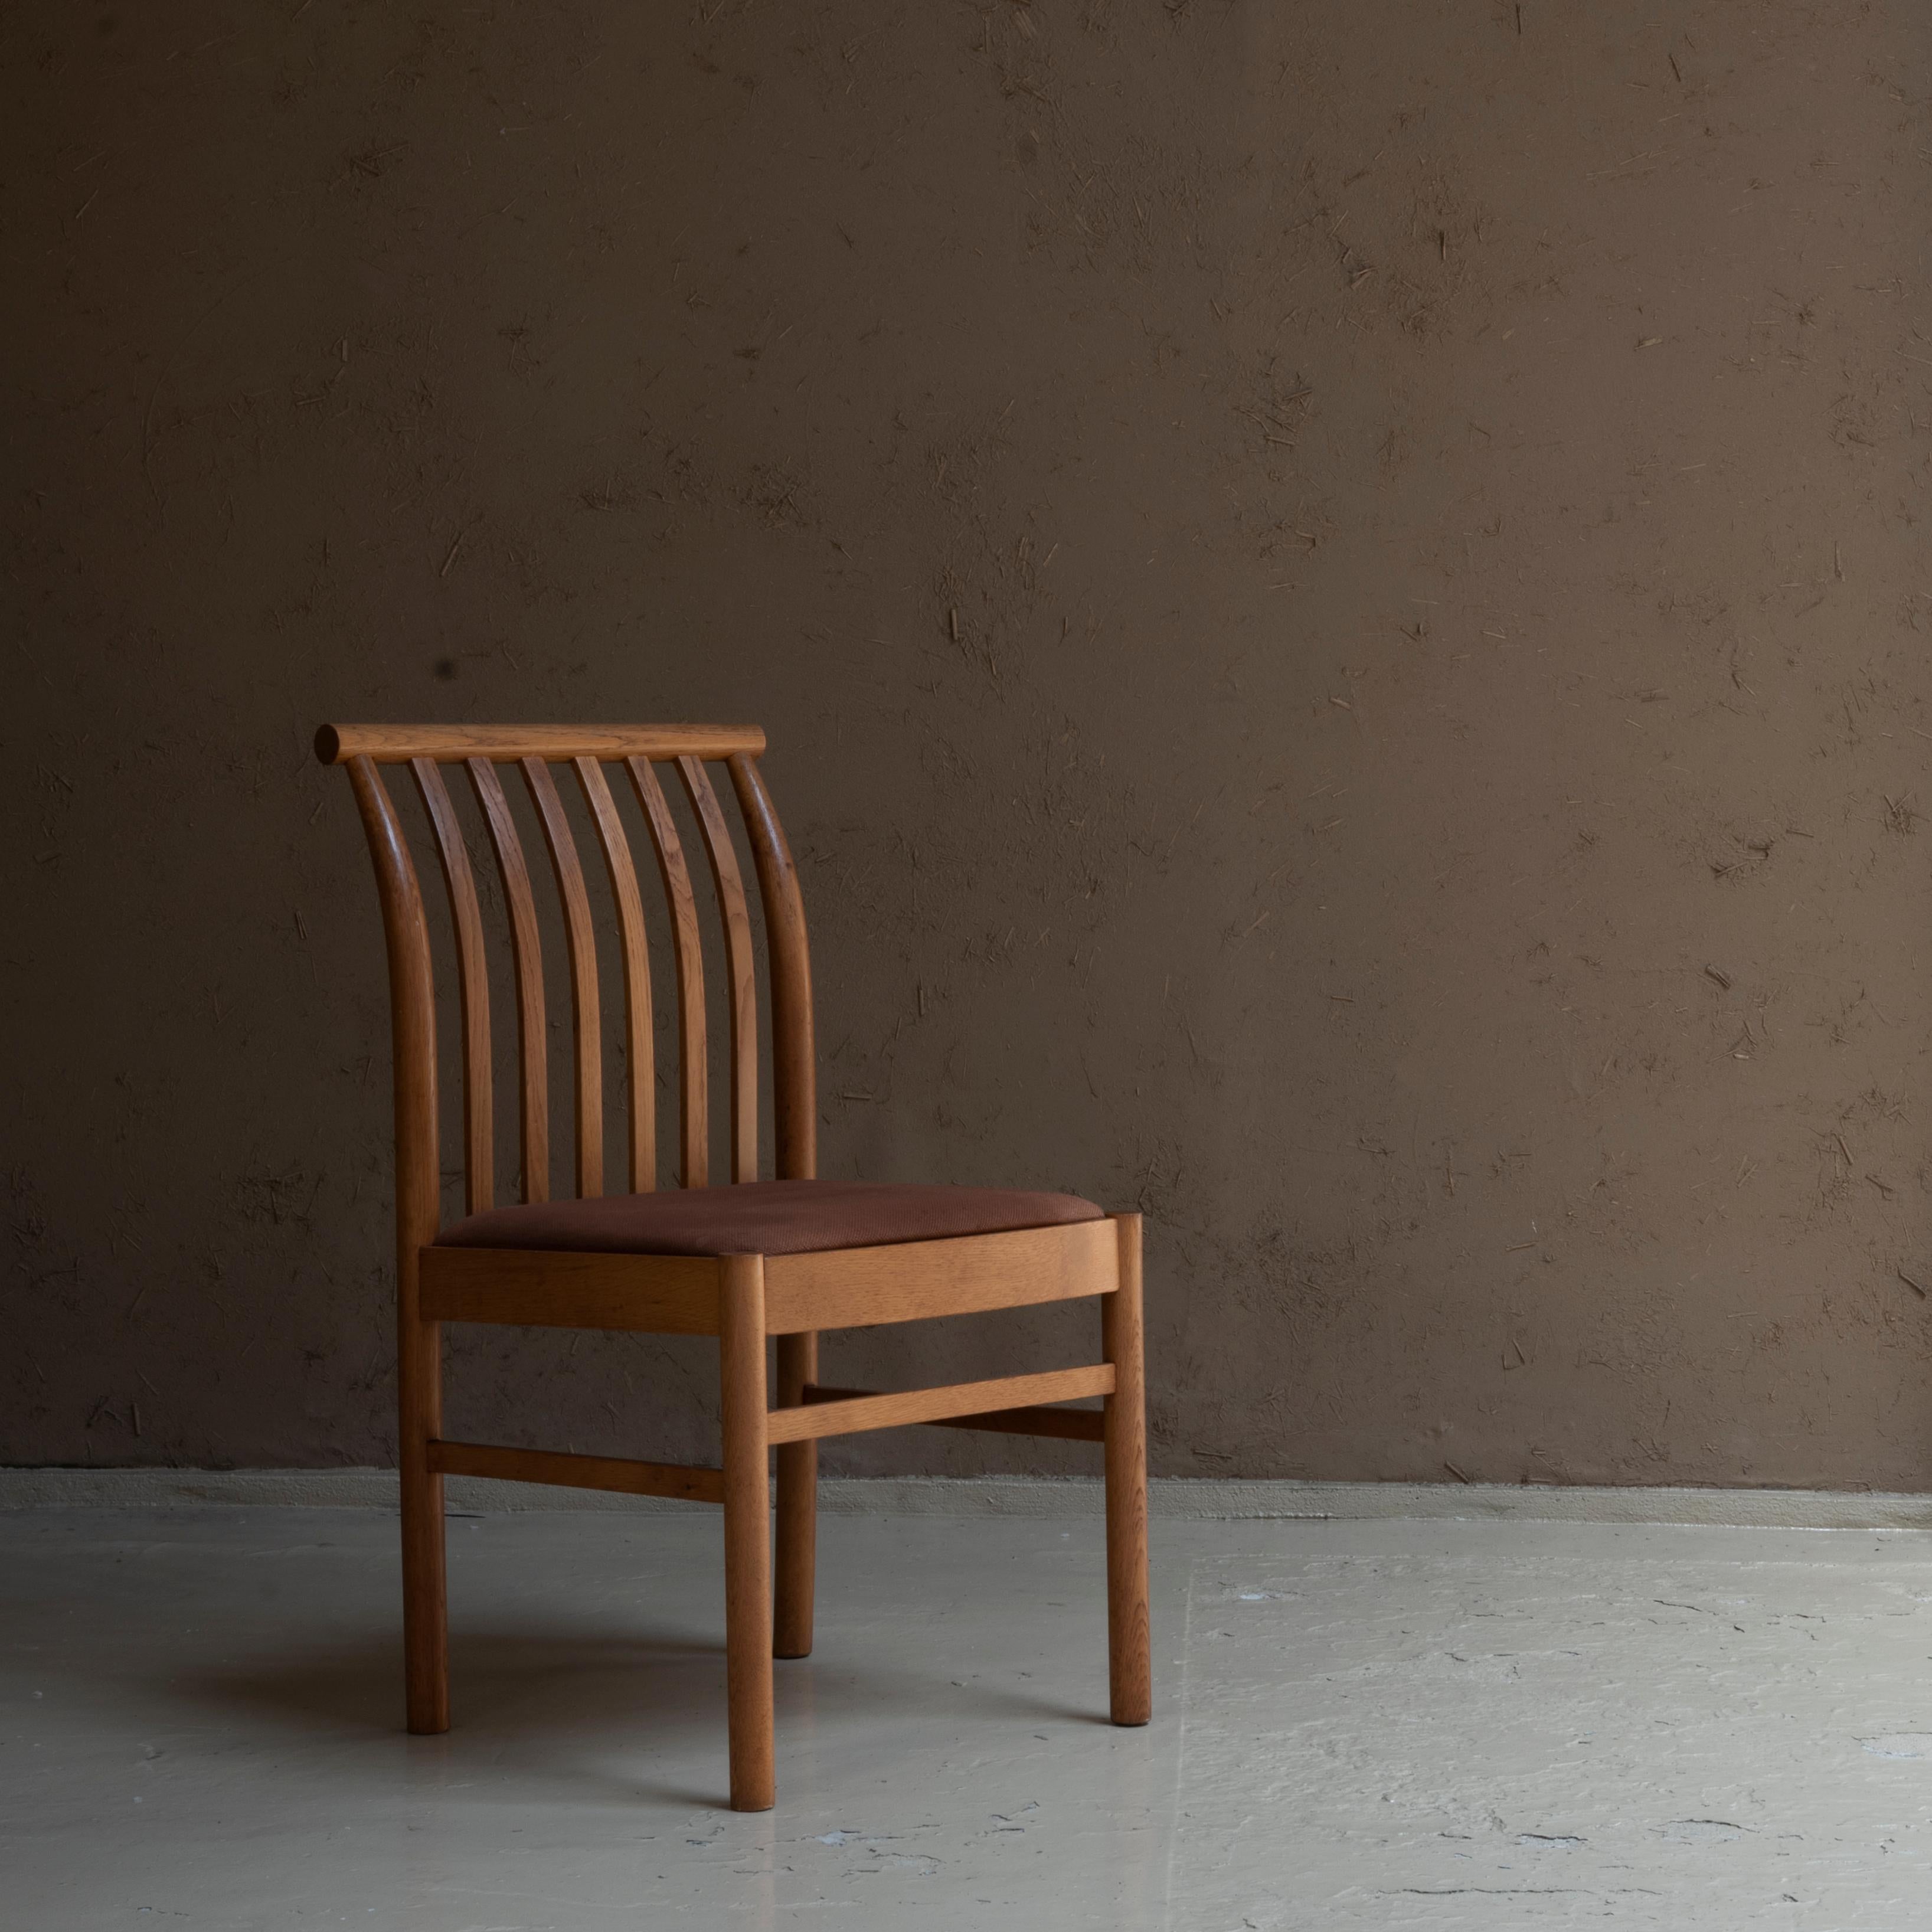 A dining chair designed by Isamu Kenmochi in 1960s.
Manufactured by Akita Mokko.
Akita Mokko is a bentwood furniture maker with over 100 years of history.
The beautiful spokes of the back made with bentwood that shows the skill of